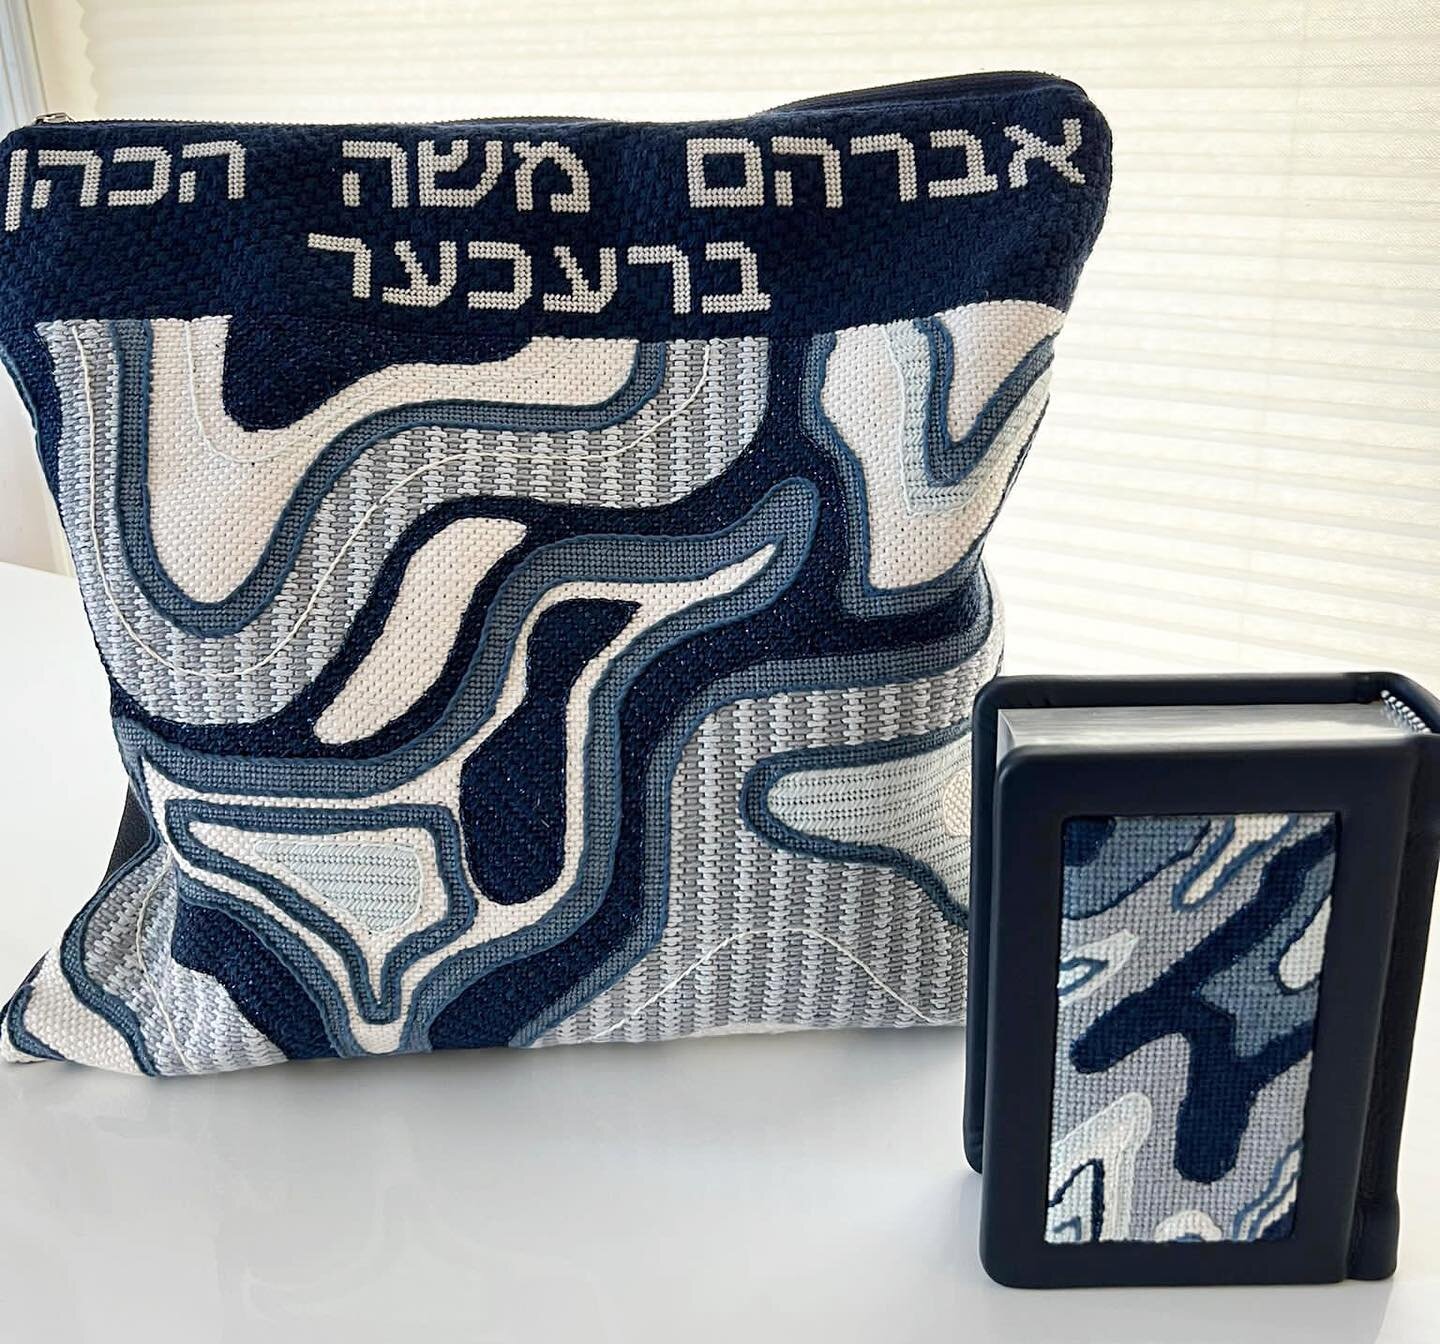 Congrats Debbie on completing another beautiful #needlepoint! Mazal tov! 🤩